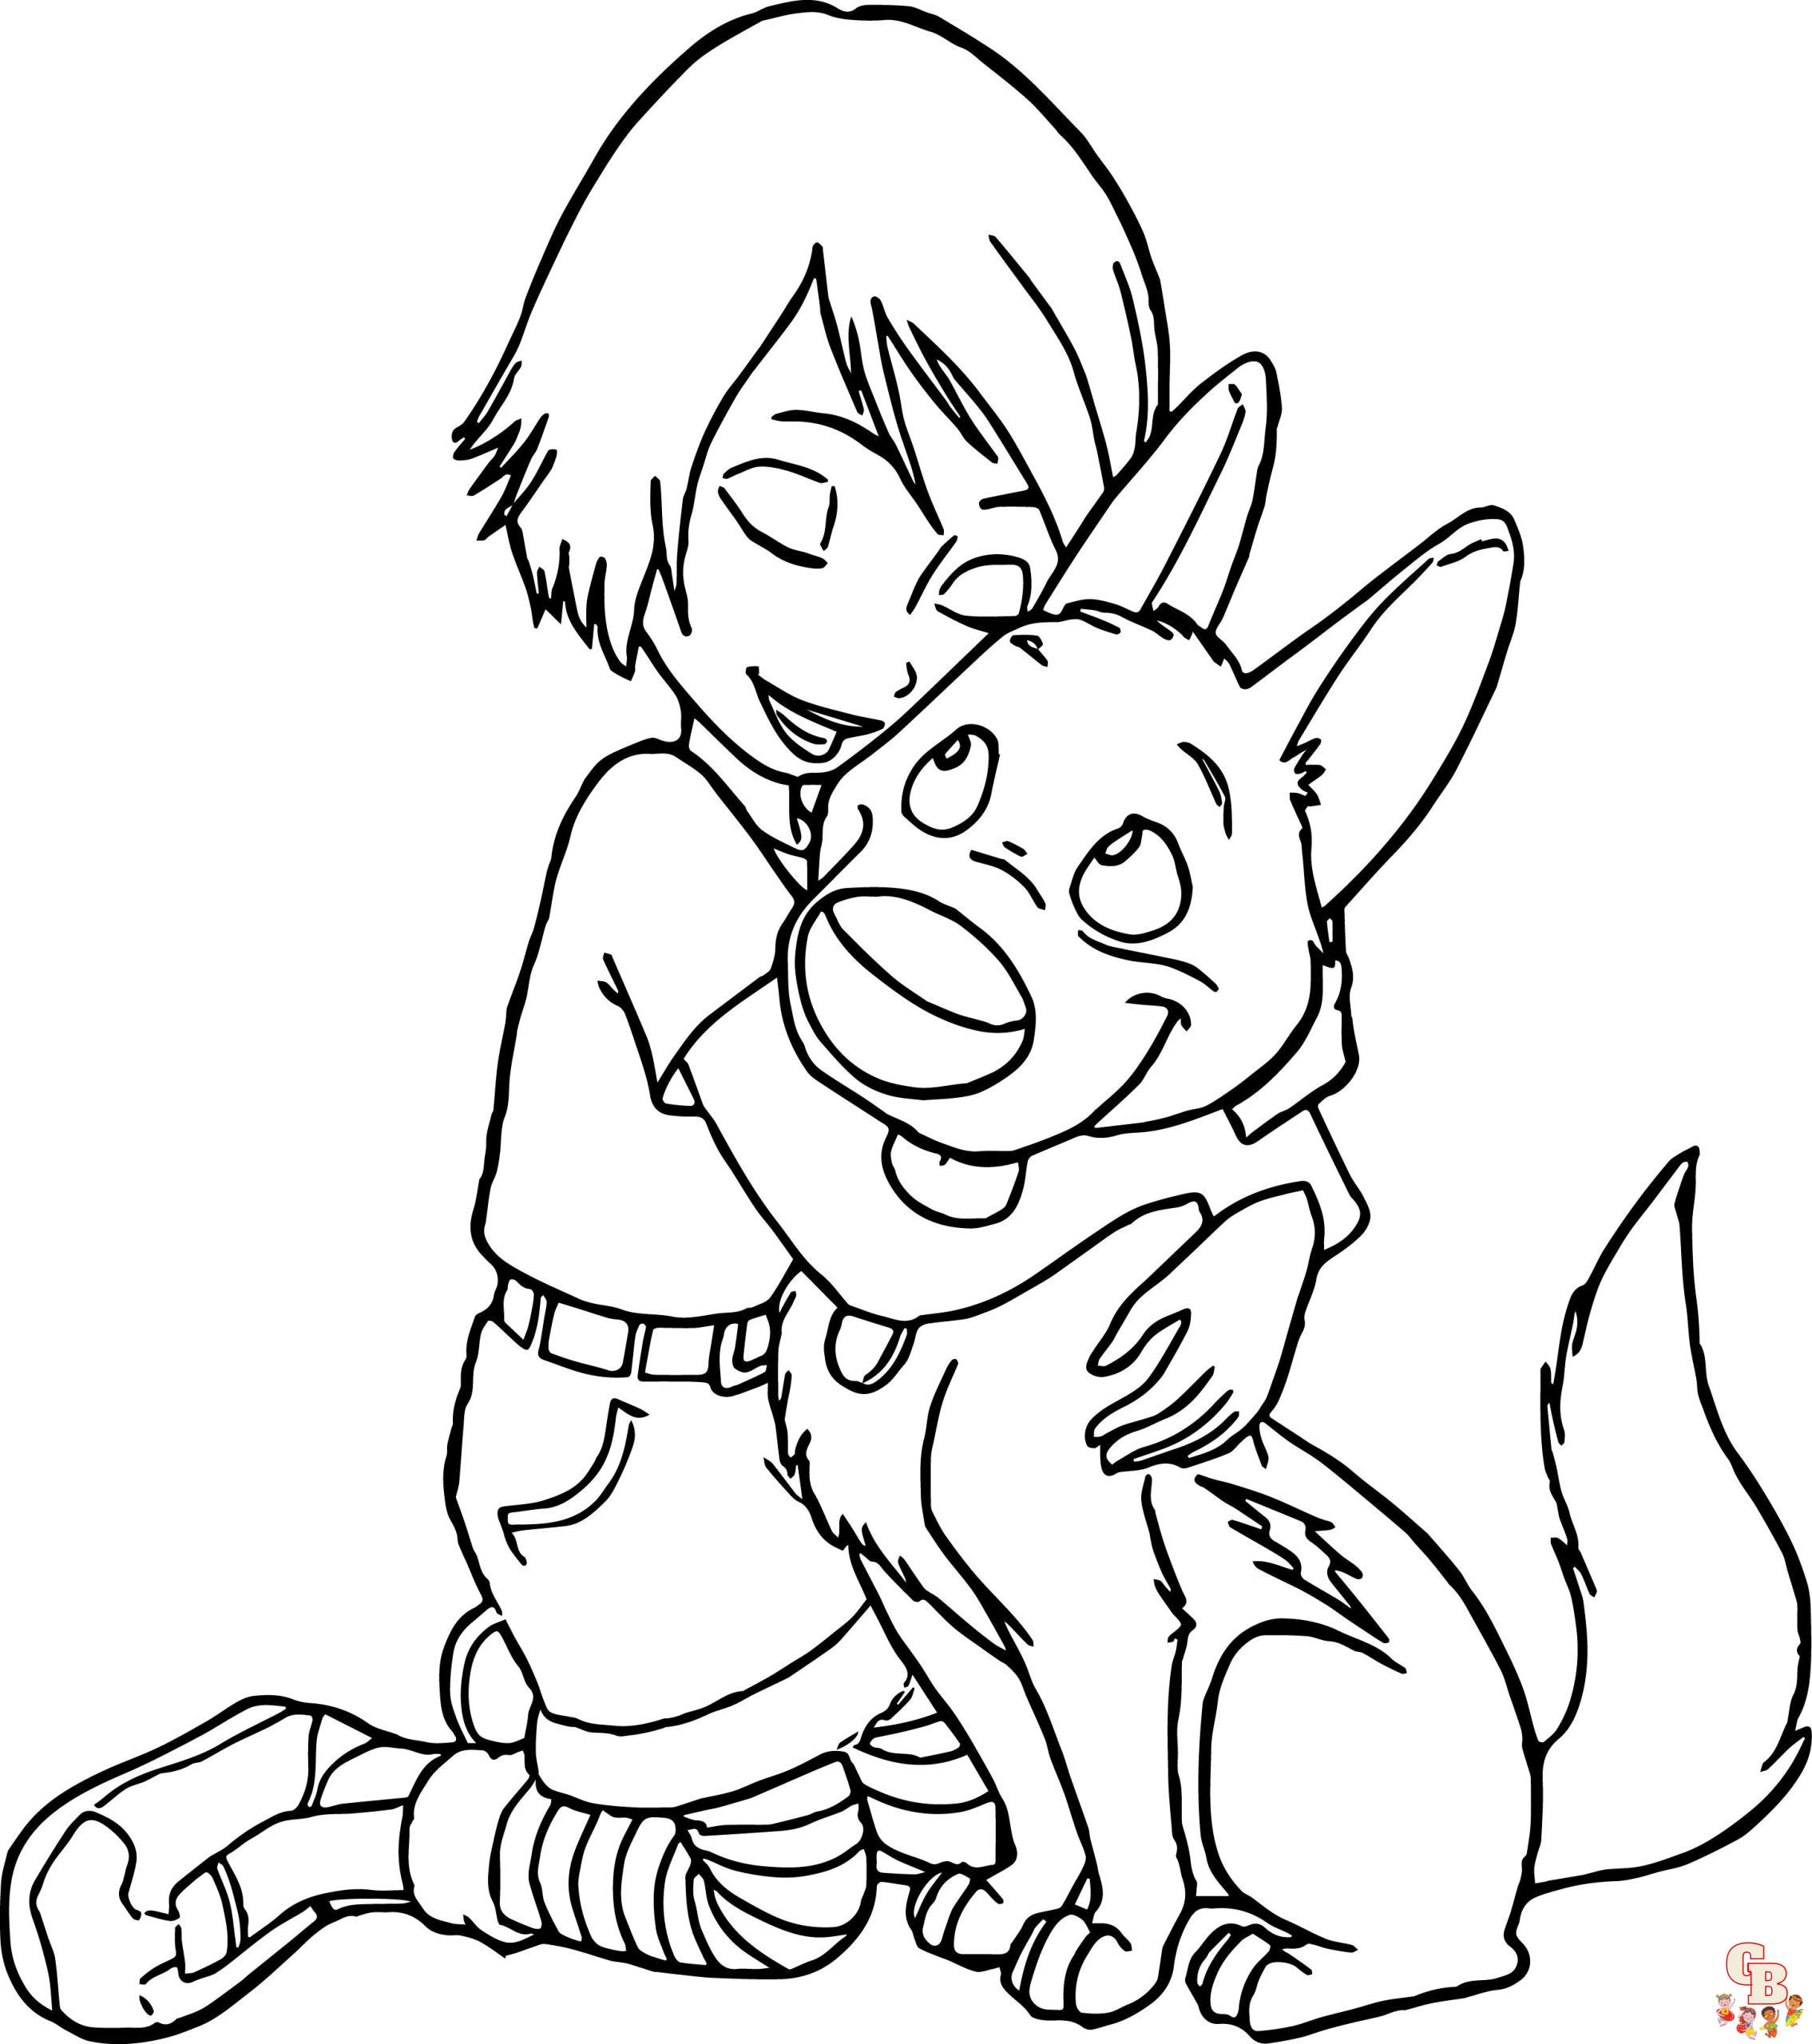 Cute Bolt and Penny Coloring Pages 6